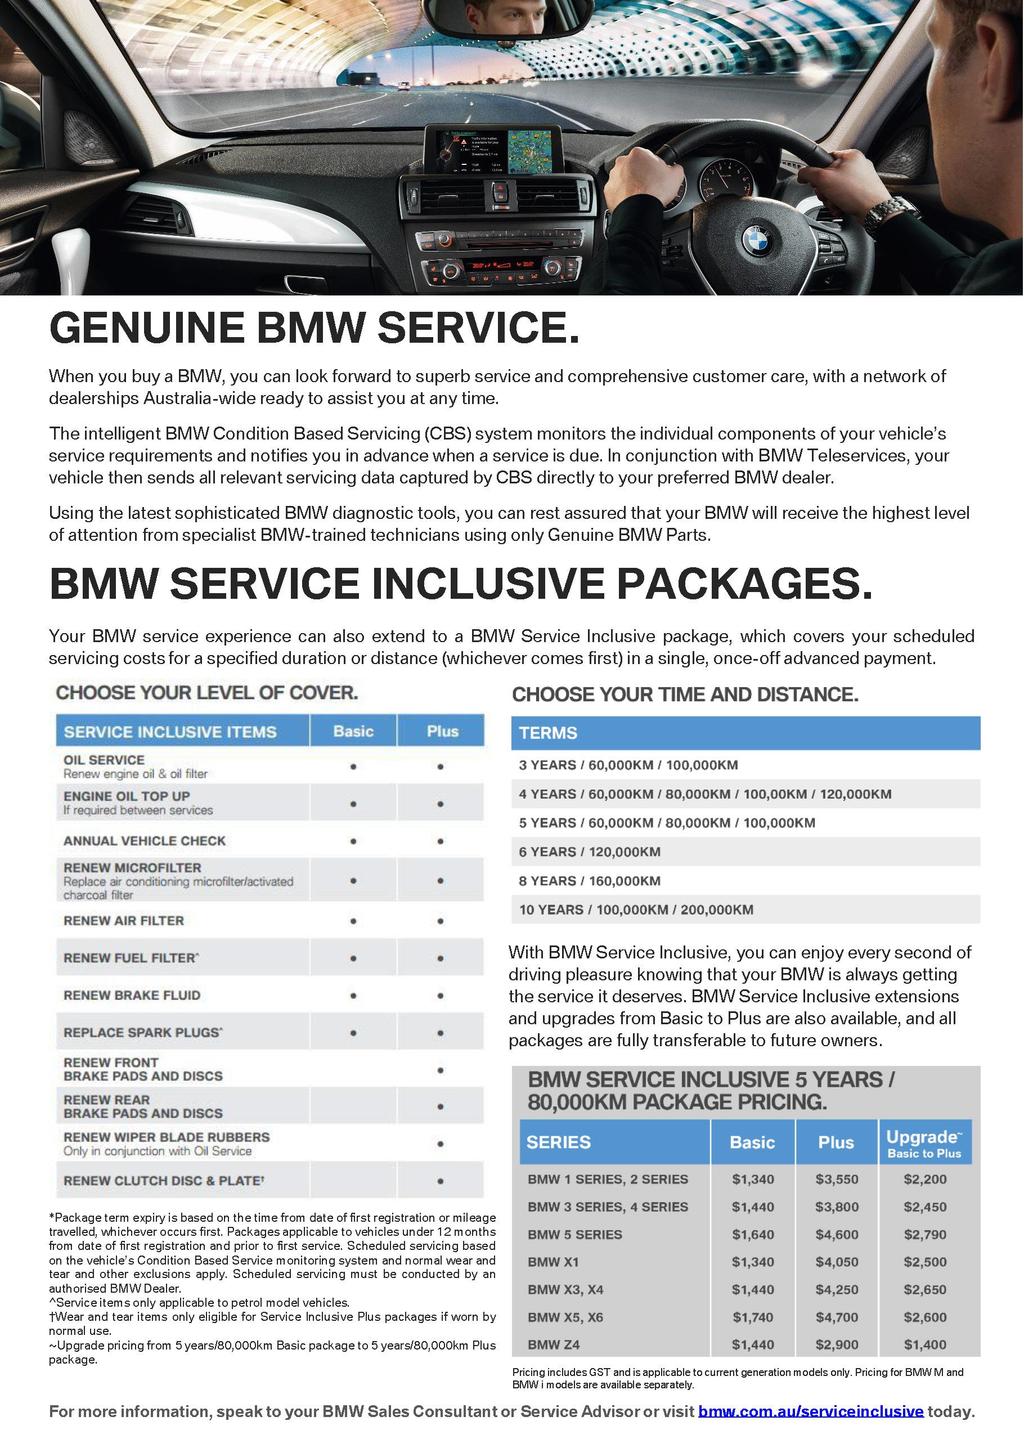 For more information, speak to your BMW Sales Consultant or